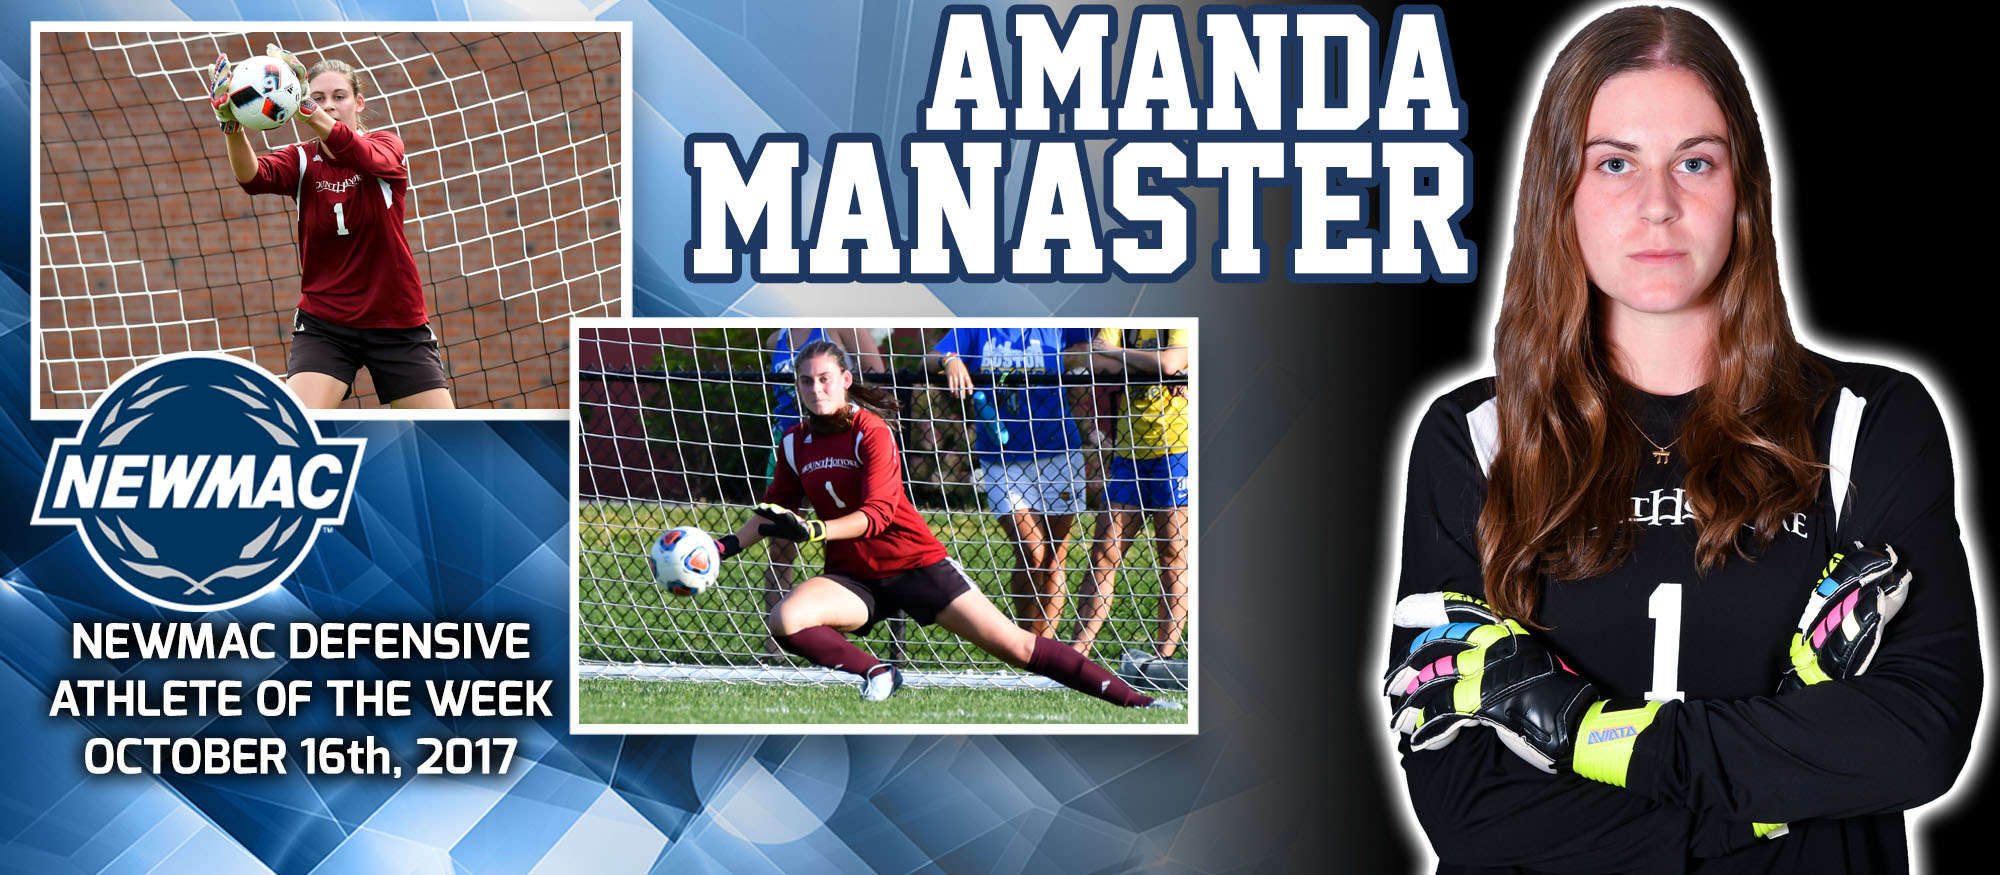 Image featuring Lyons soccer goalie Amanda Manaster, who was named the NEWMAC co-Defensive Athlete of the Week on October 16